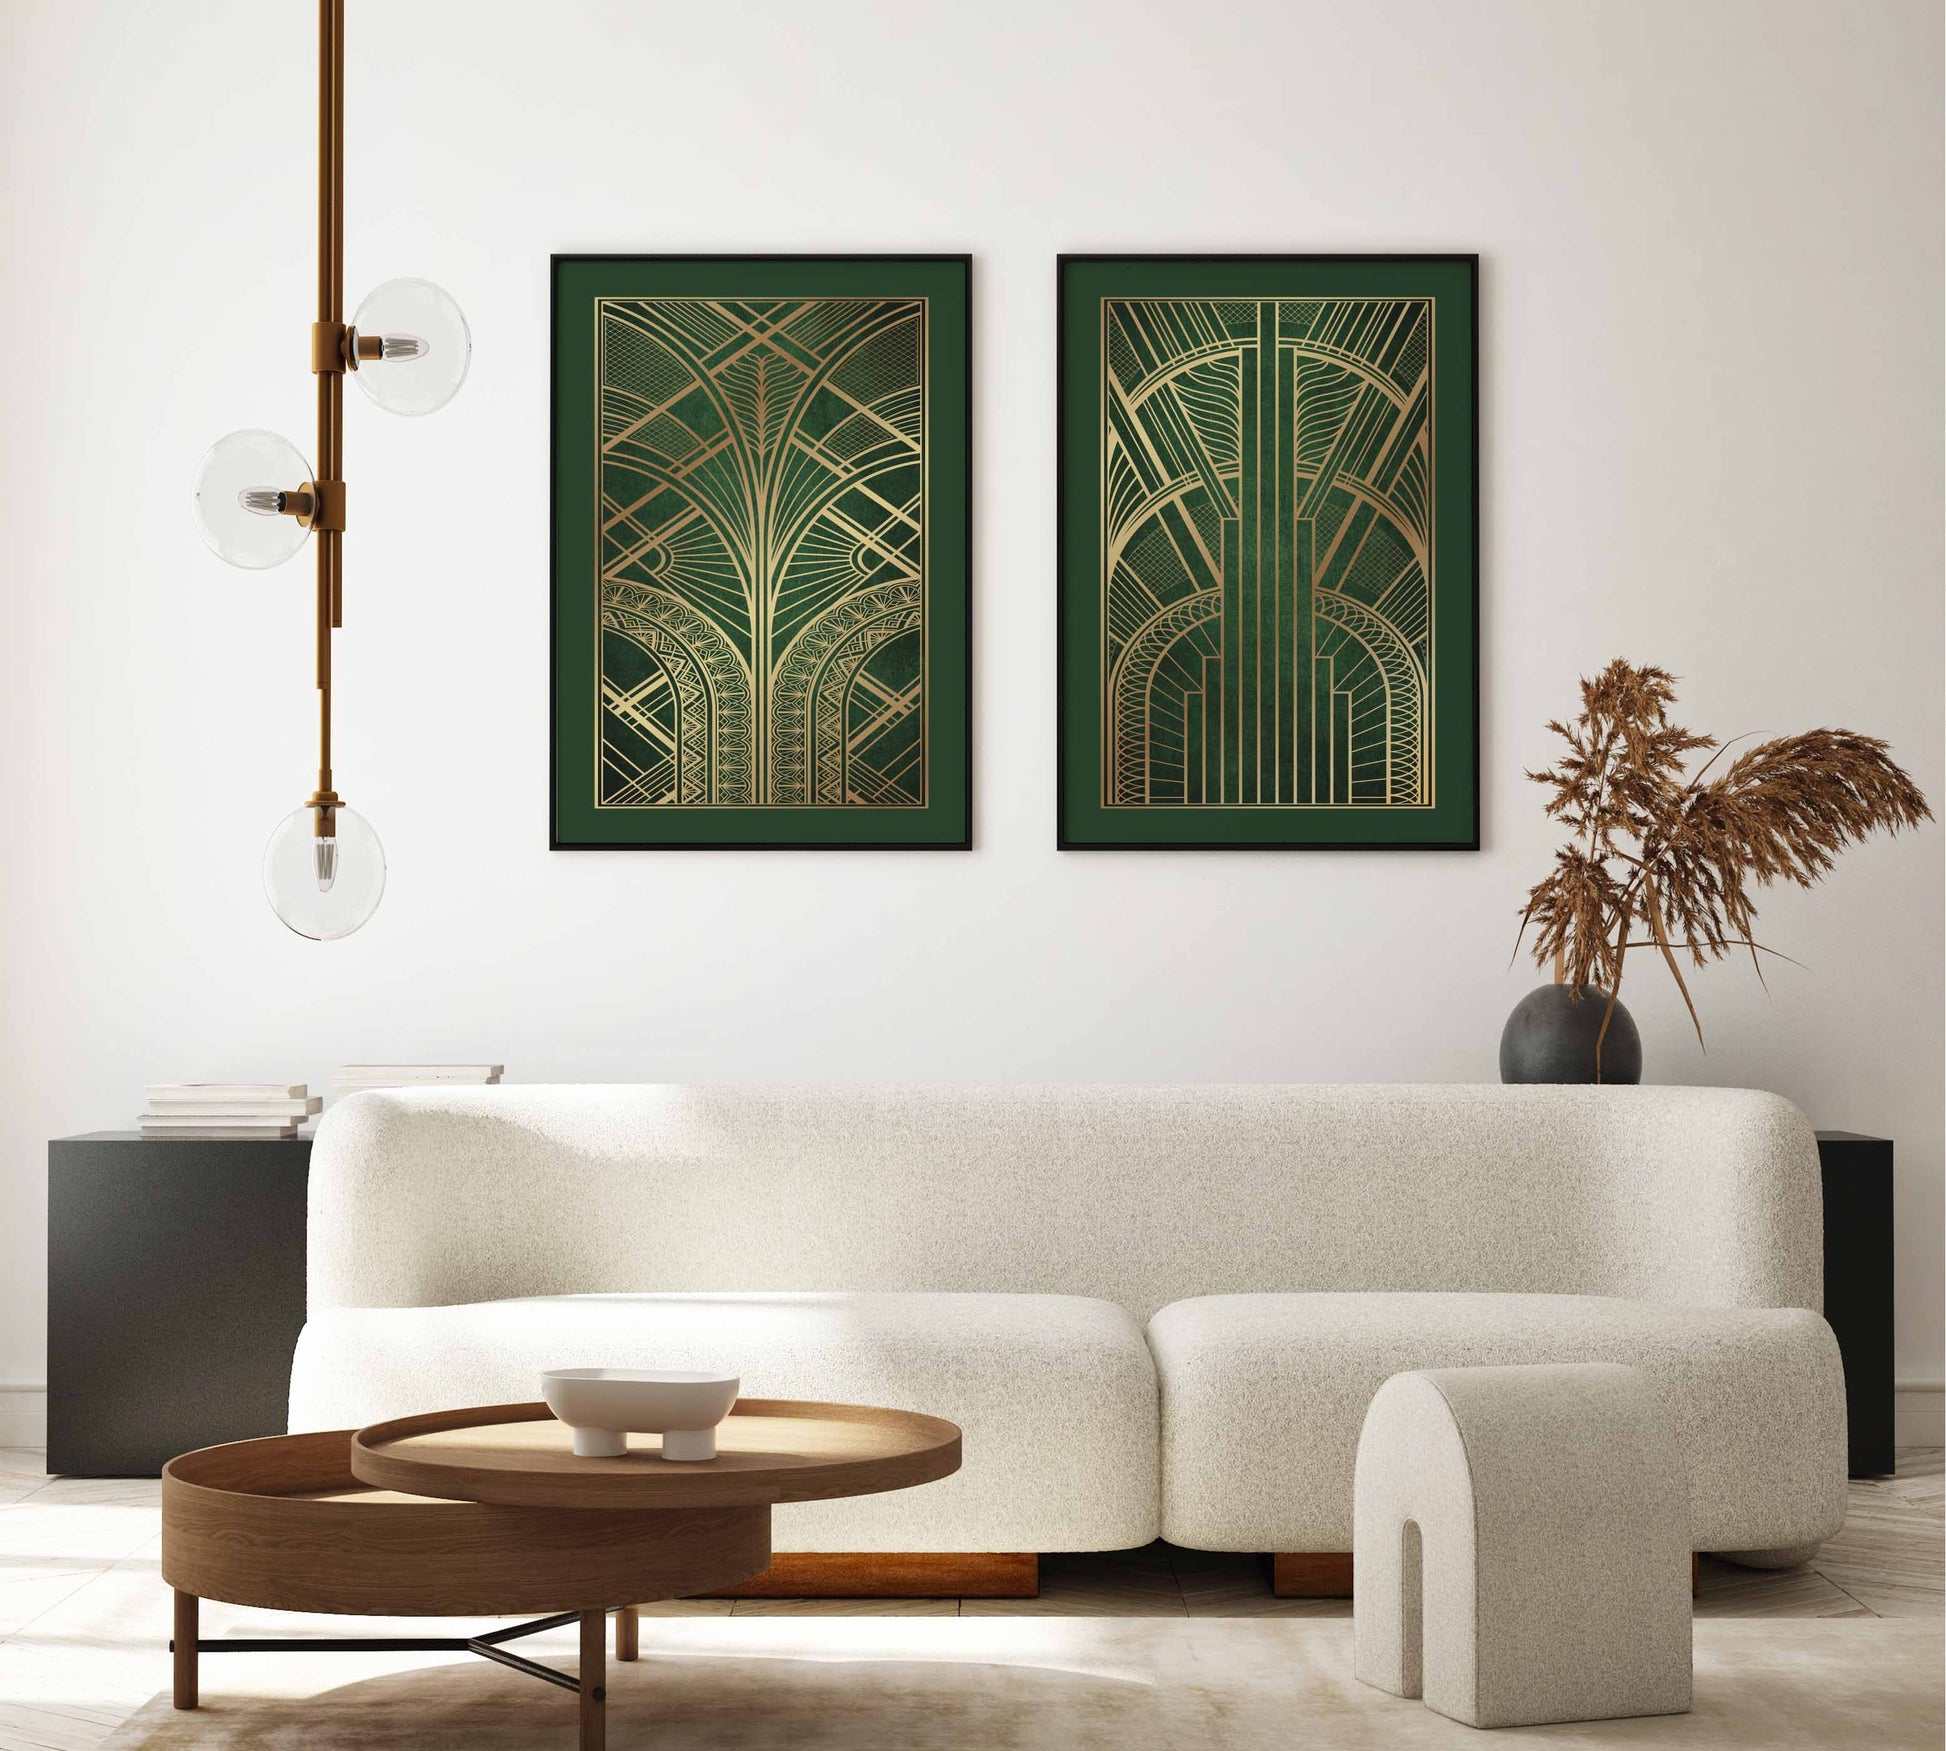 Set of art deco prints in green and gold with geometric symmetrical pattern